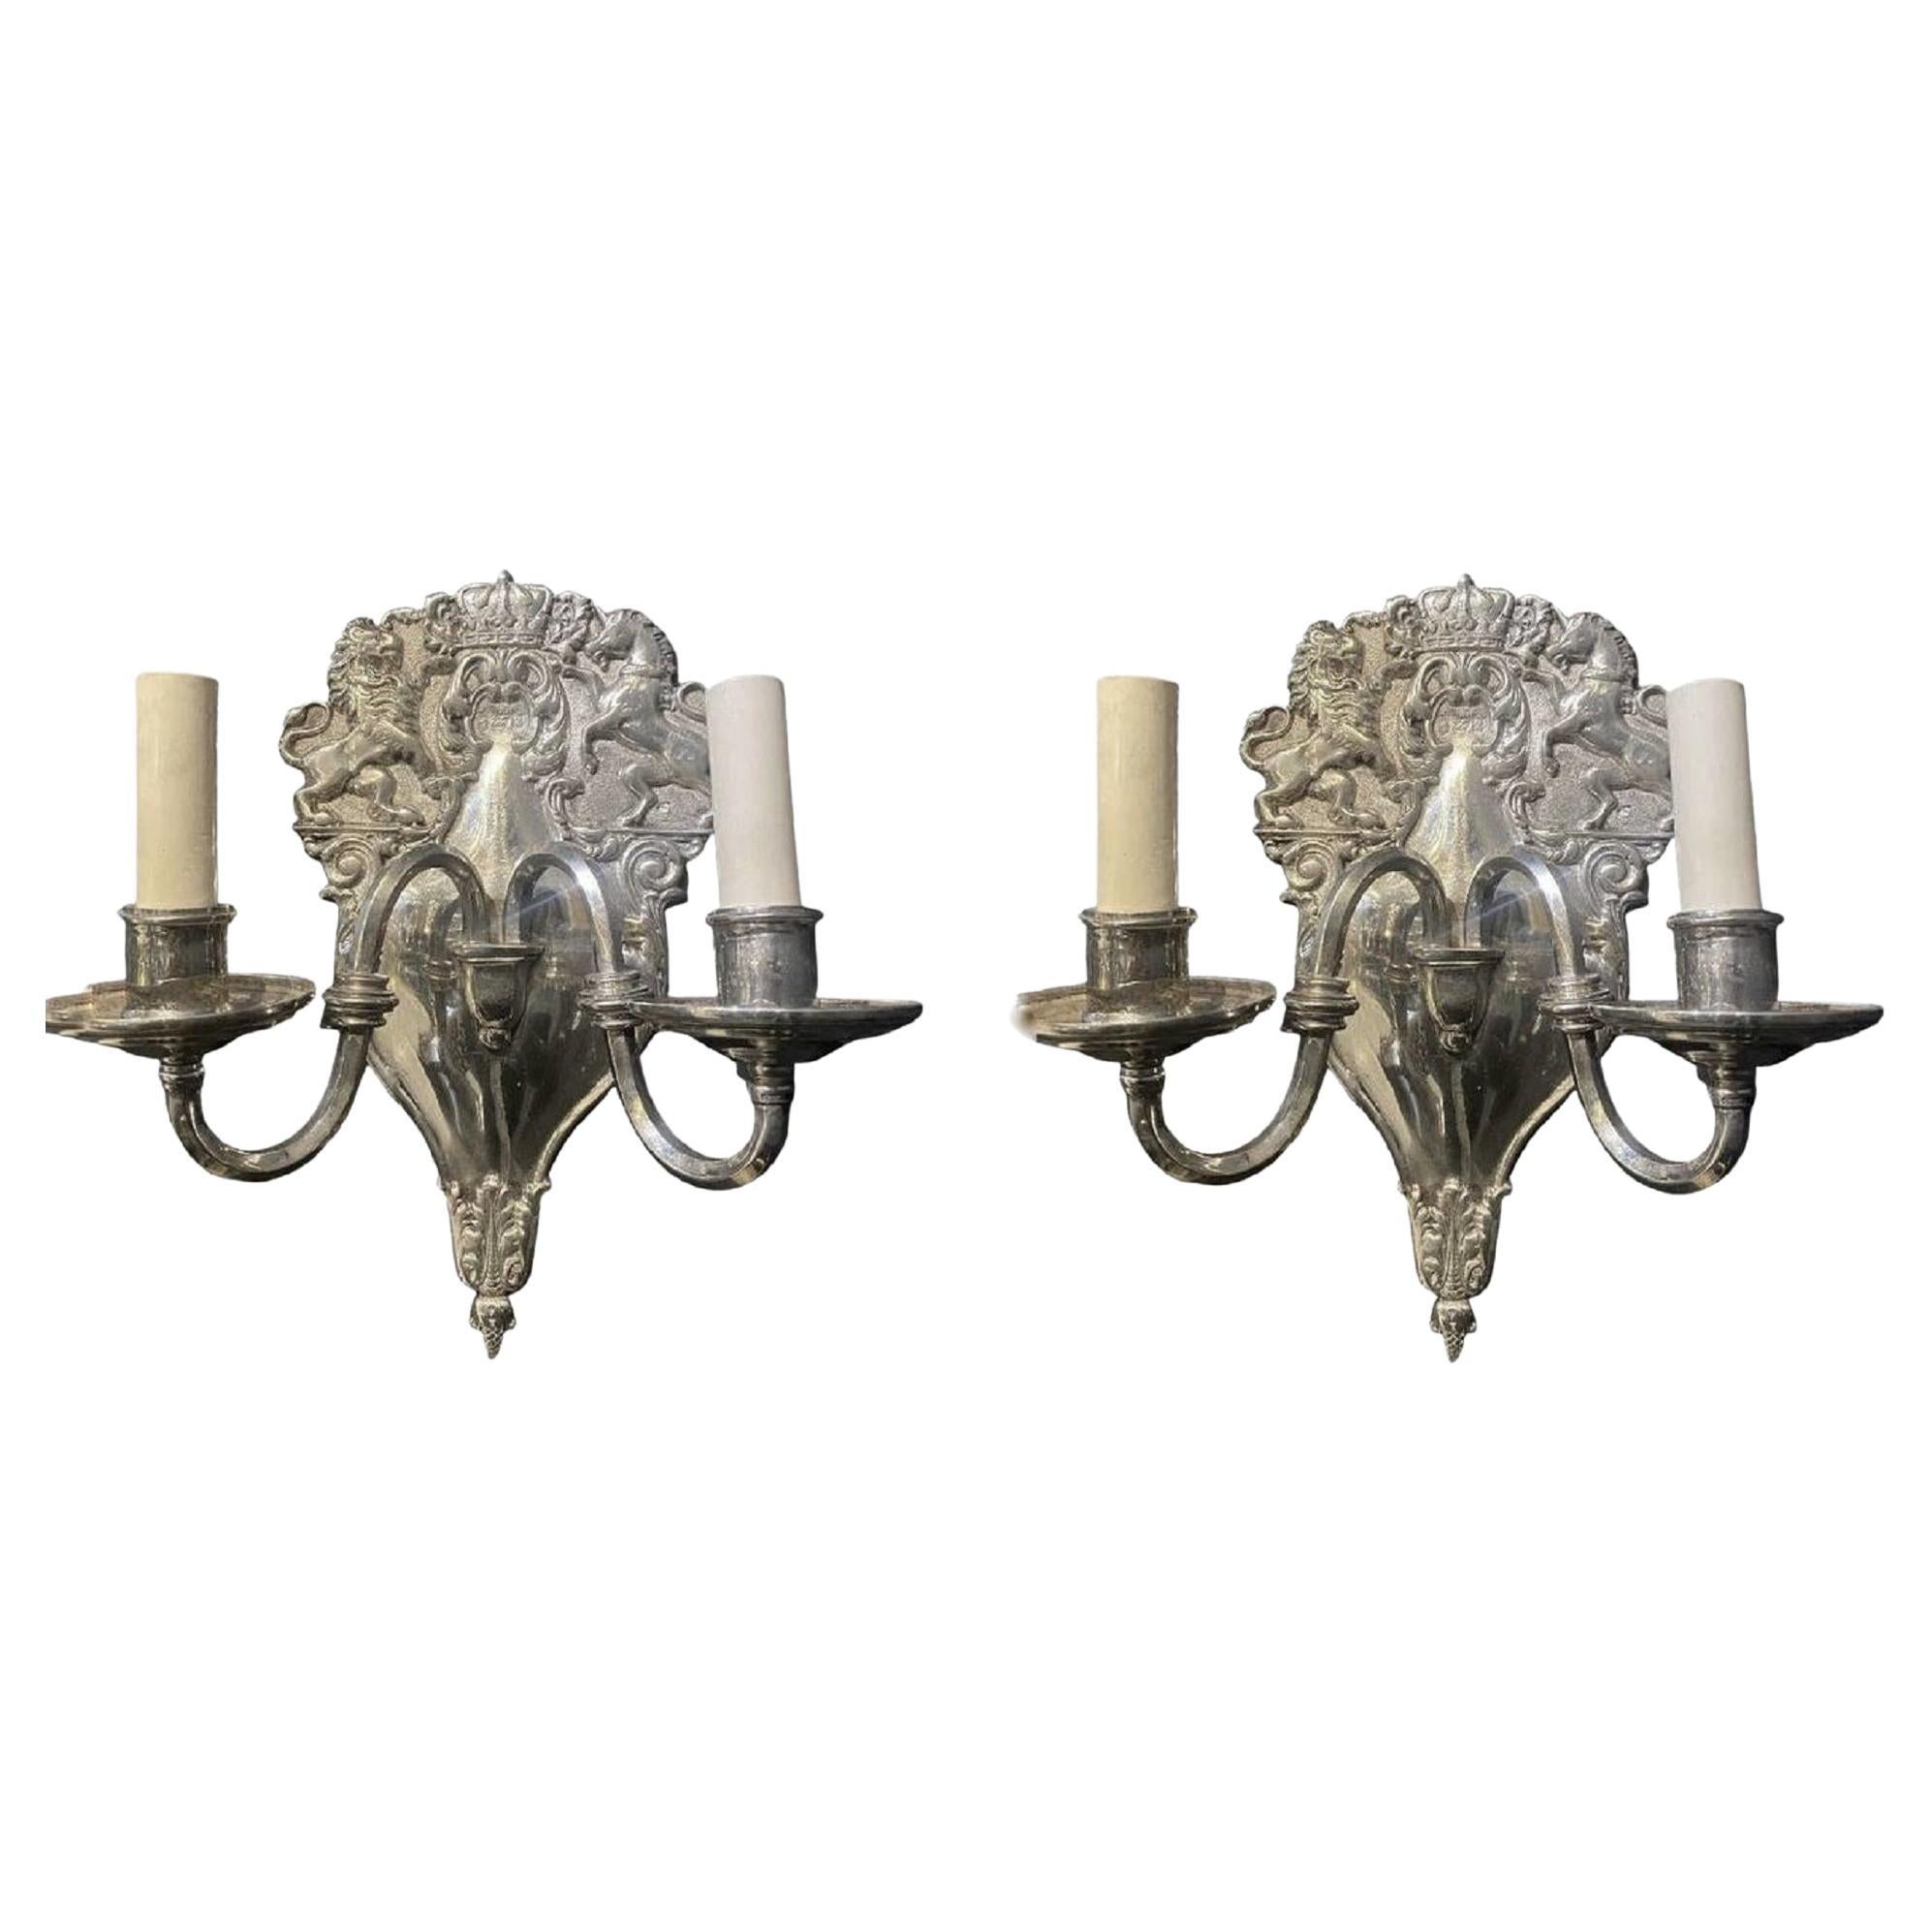 1920's English Silver Plated Sconces with Heraldry Design